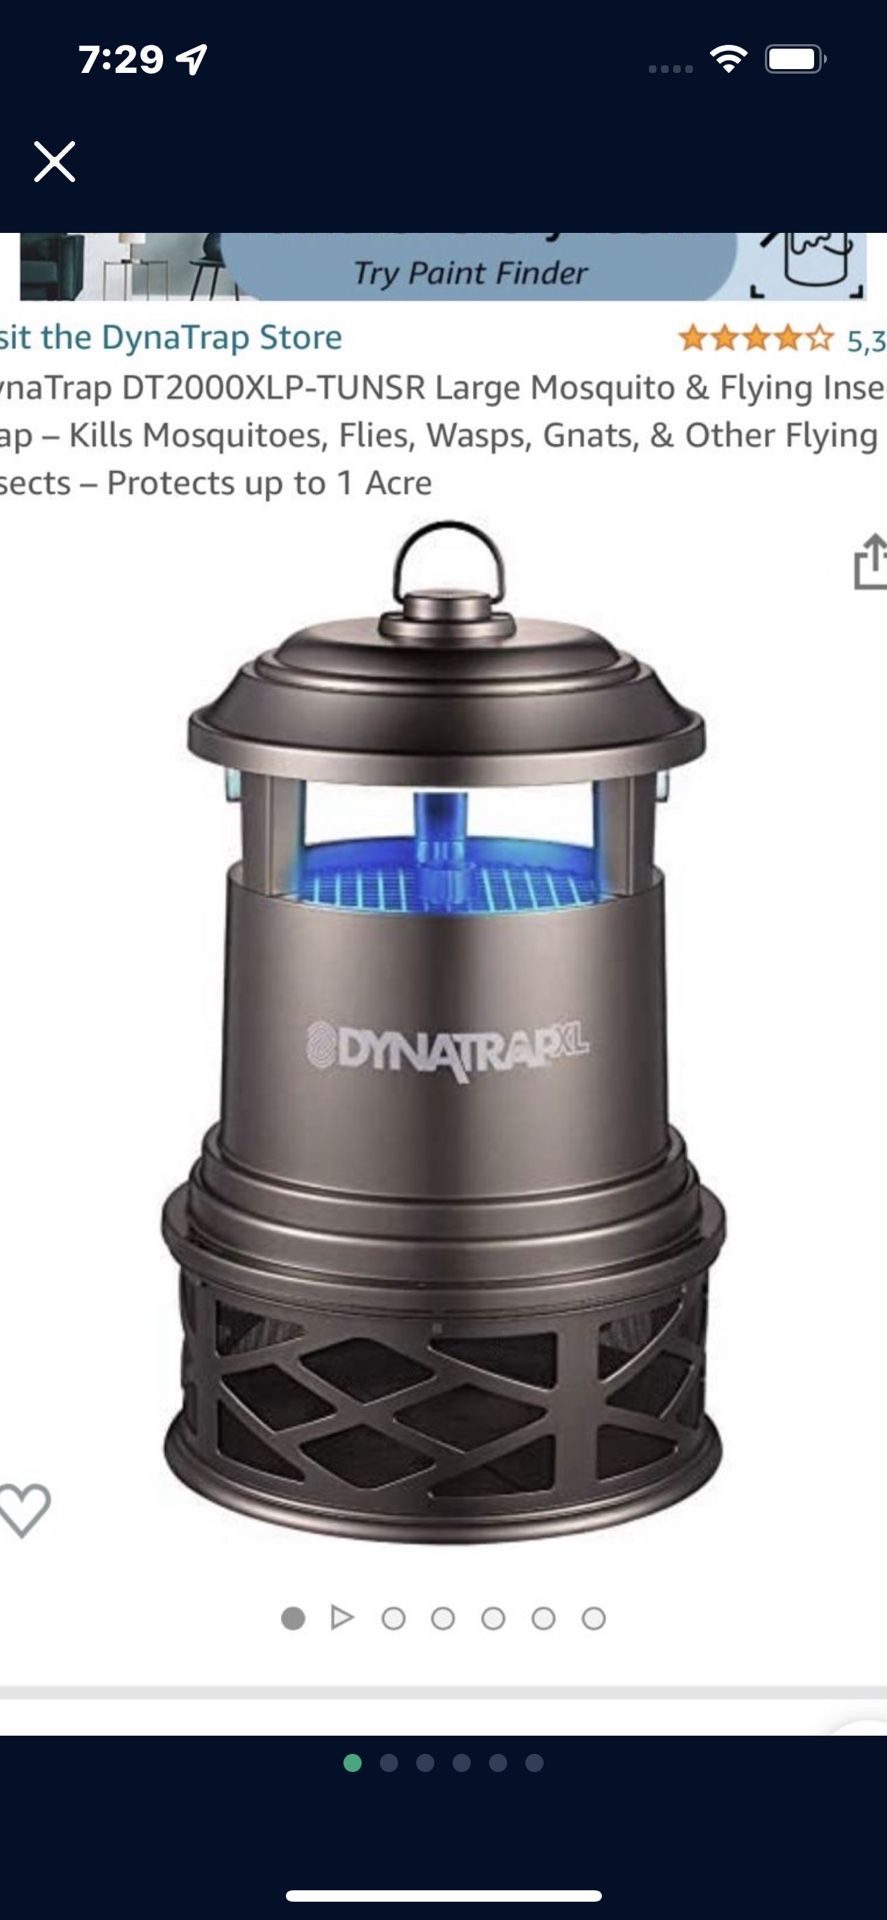 DynaTrap DT2000XLP-TUNSR Large Mosquito & Flying Insect Trap – Kills Mosquitoes, Flies, Wasps, Gnats, & Other Flying Insects – Protects up to 1 Acre